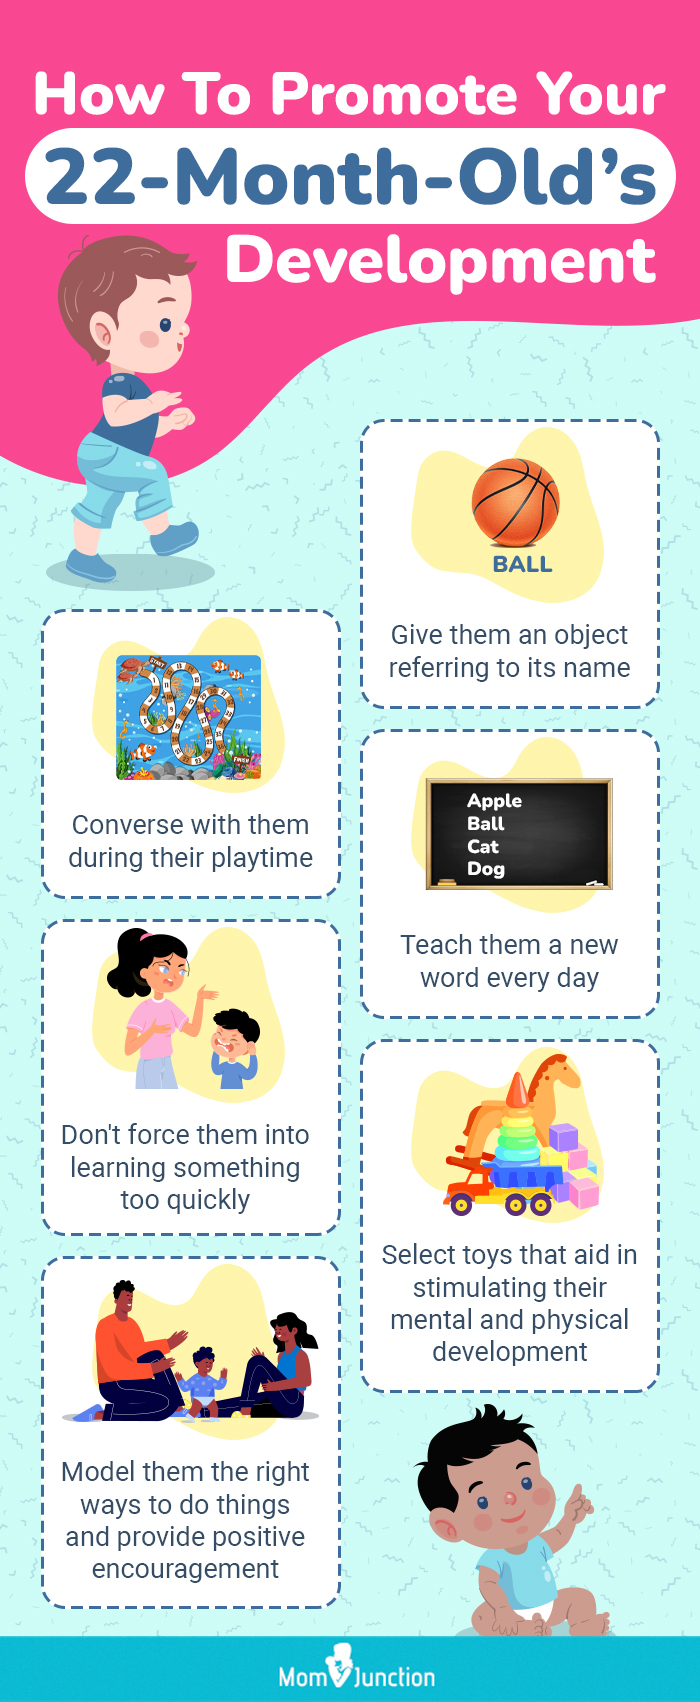 how to promote your 22 month old’s development [infographic]